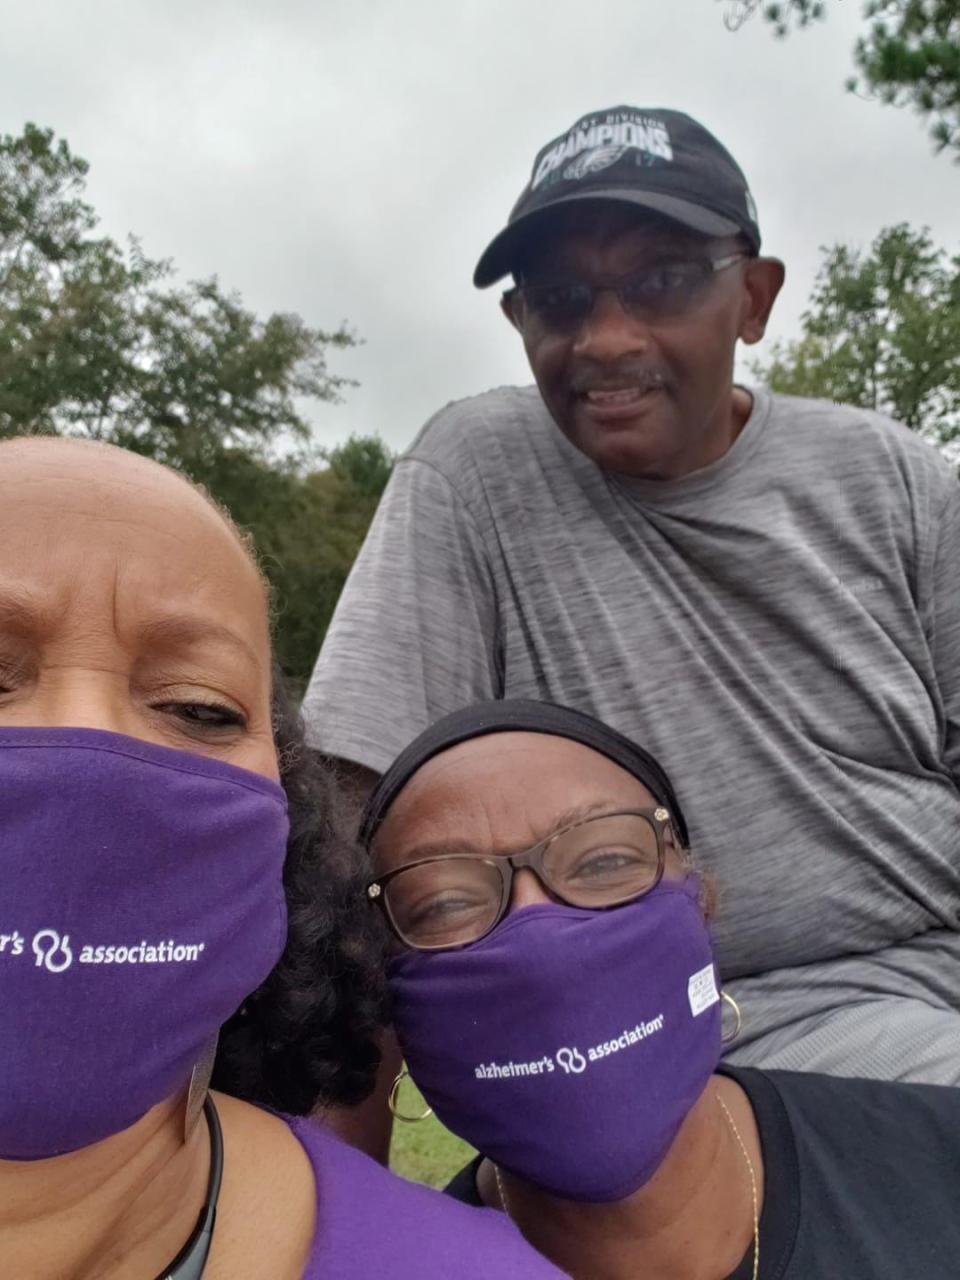 Michelle Mills, team captain, is shown walking with her team members at Vestibule AME Zion Church in Kings Mountain as part of the 2020 Walk to End Alzheimer's held Sept. 12 in Gaston, Cleveland and Lincoln counties.